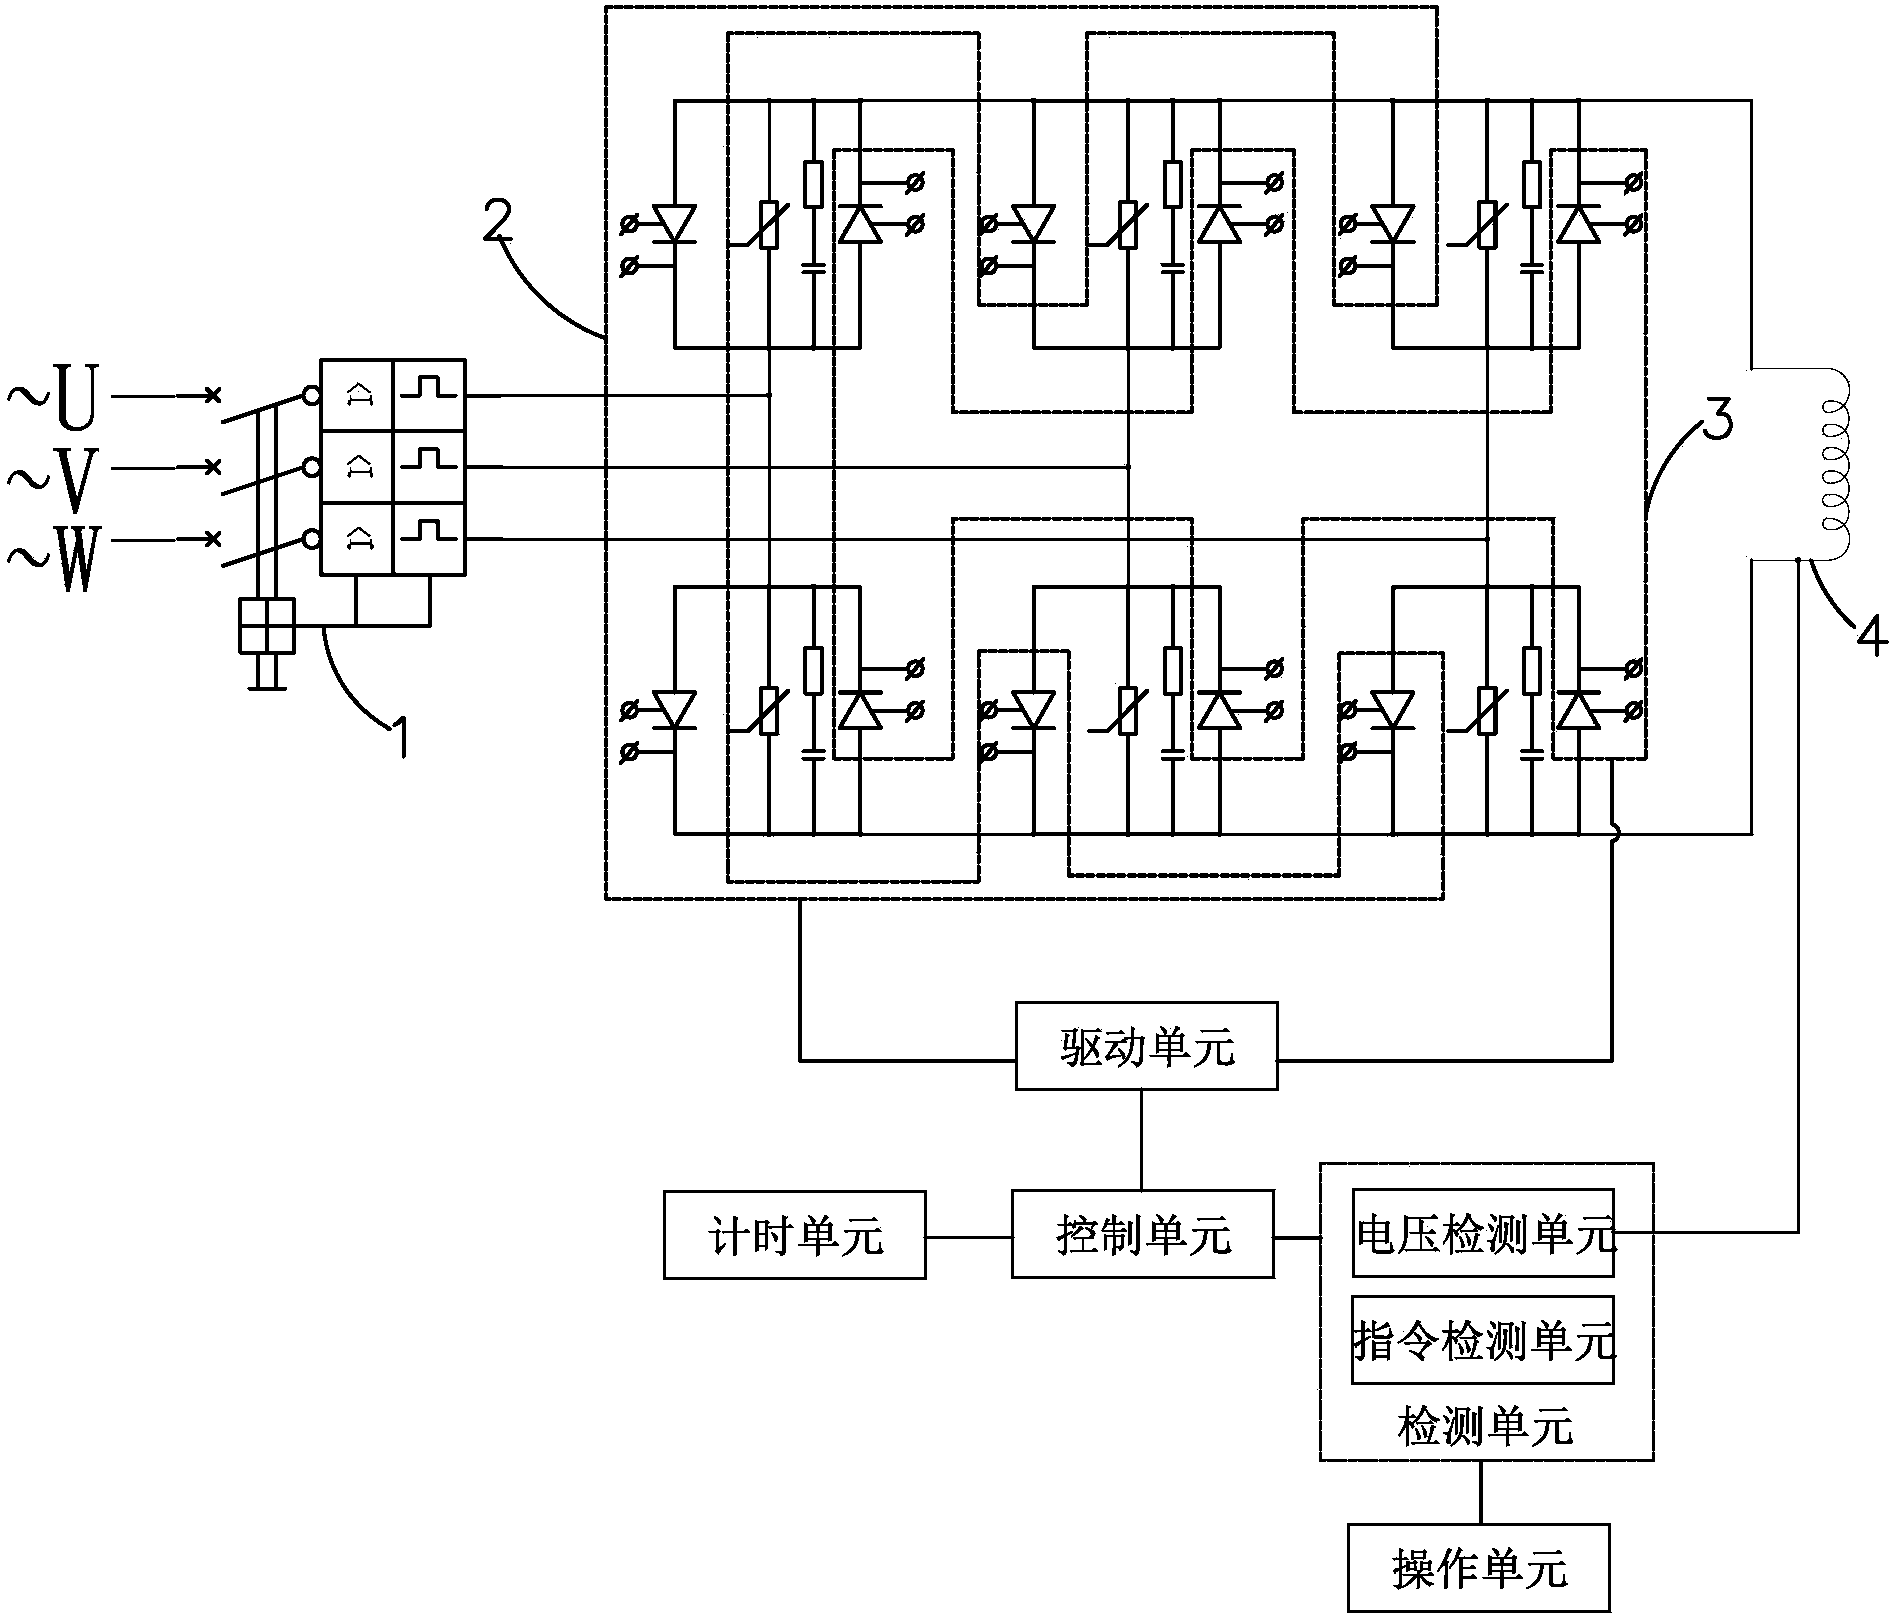 Lifting electromagnet control method and system